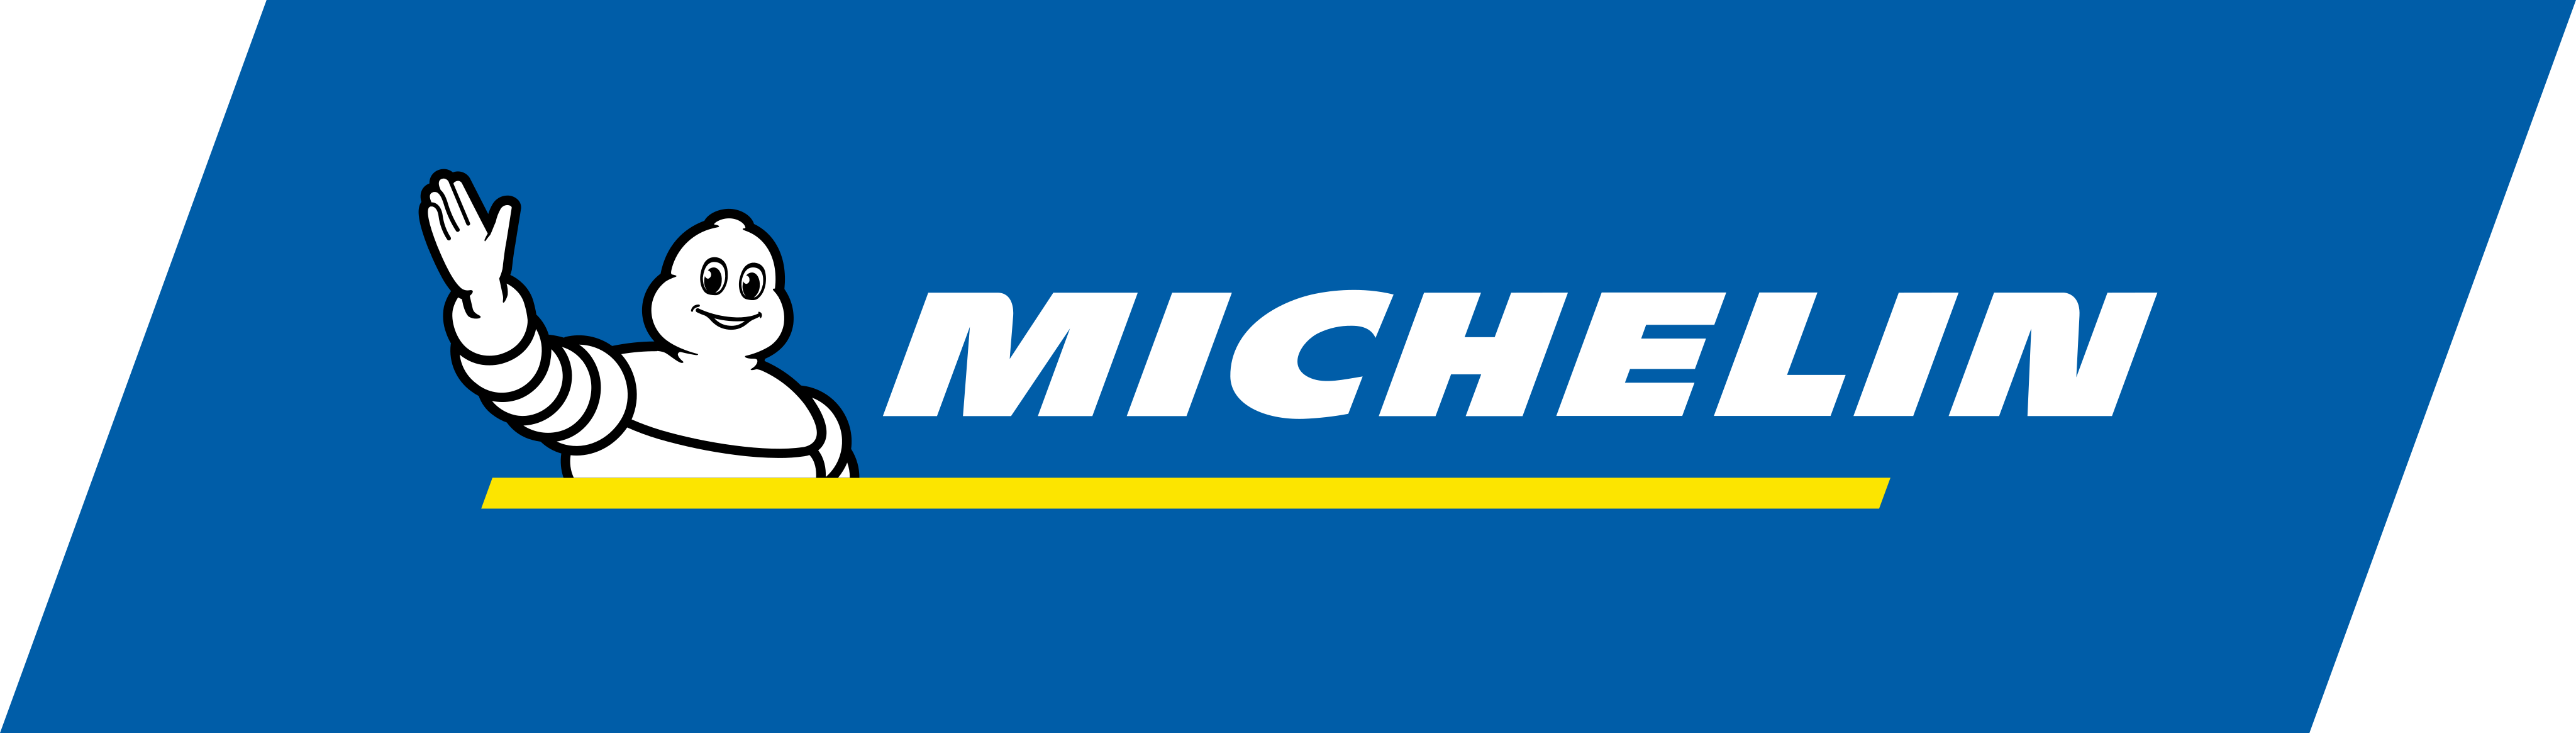 Michelin Logo PNG Transparent Michelin Logo.PNG Images. | PlusPNG